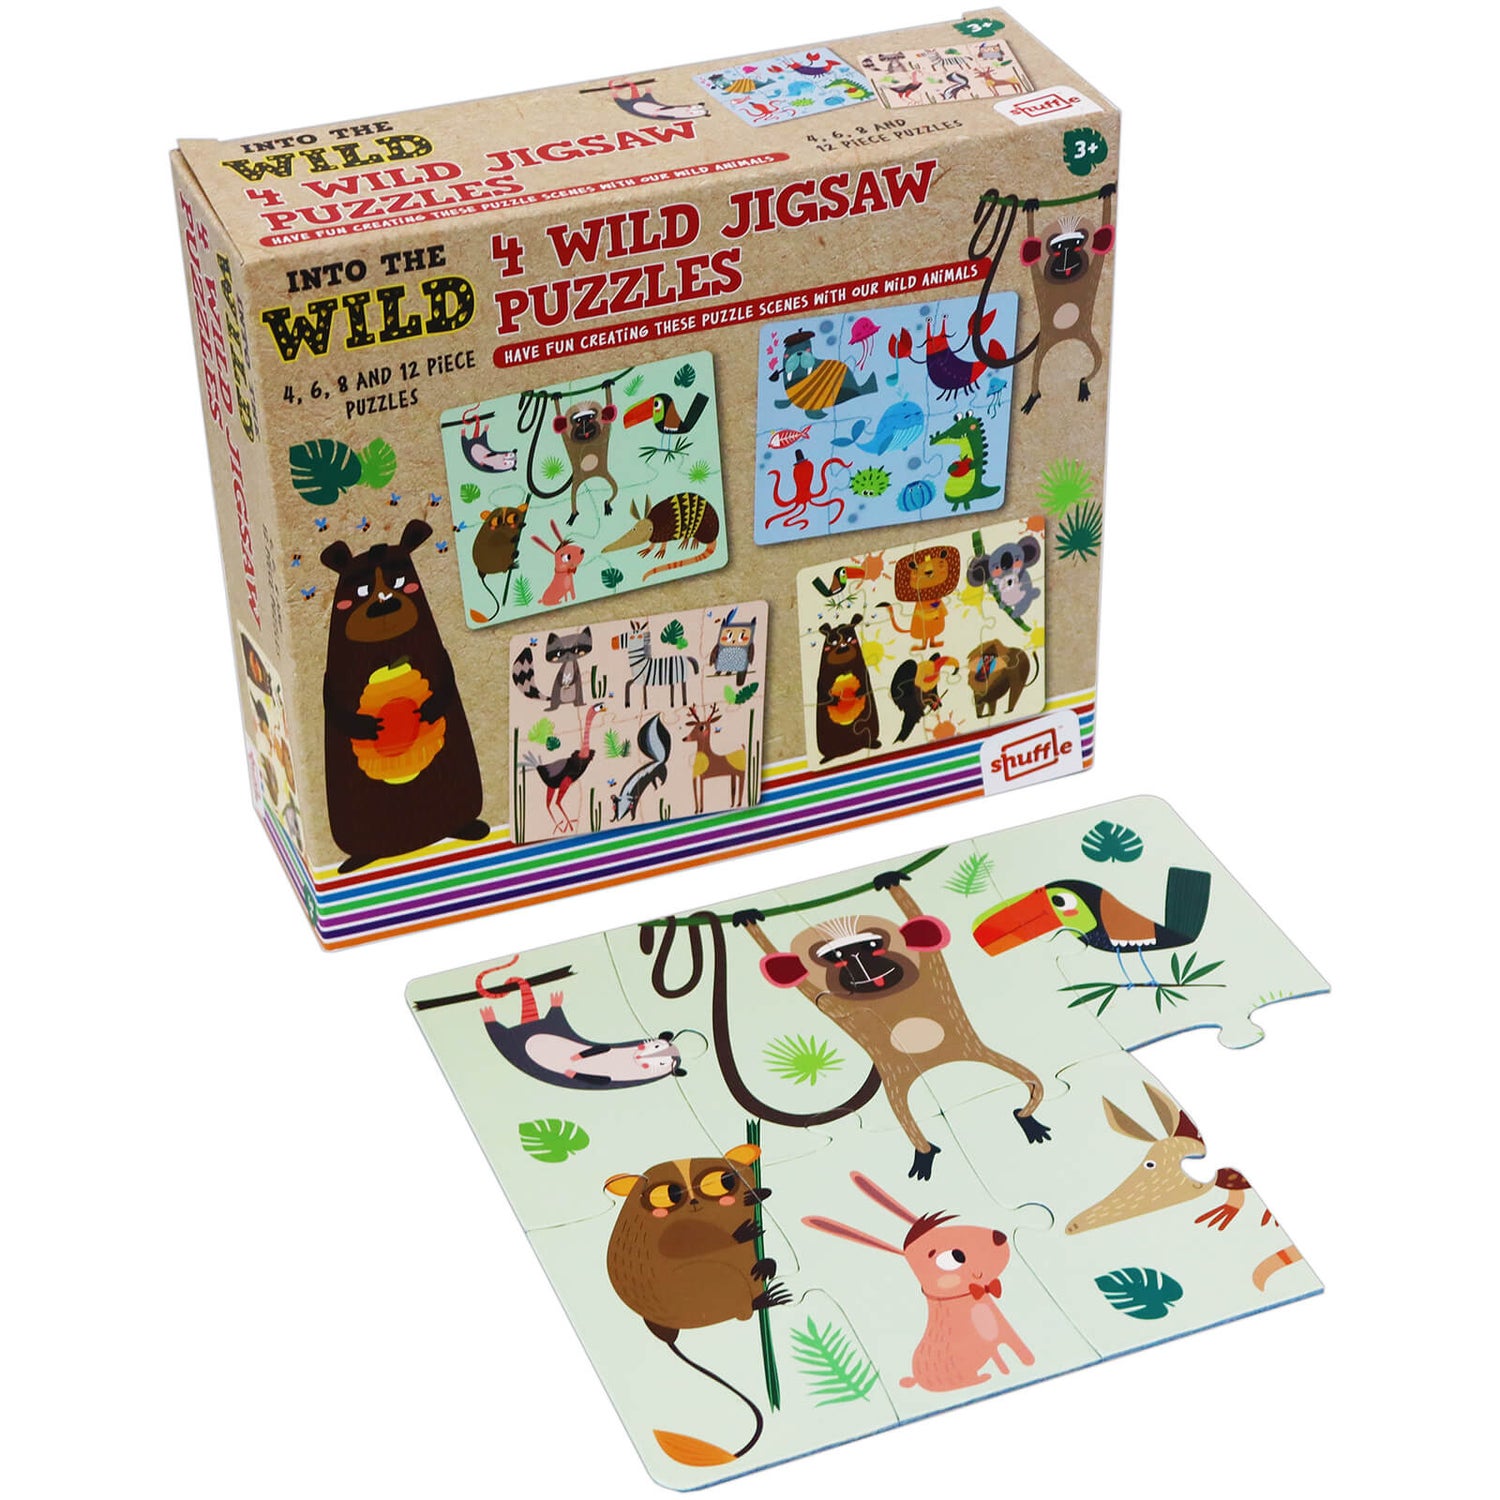 Shuffle - Into the Wild - 4 in 1 Jigsaw Puzzles